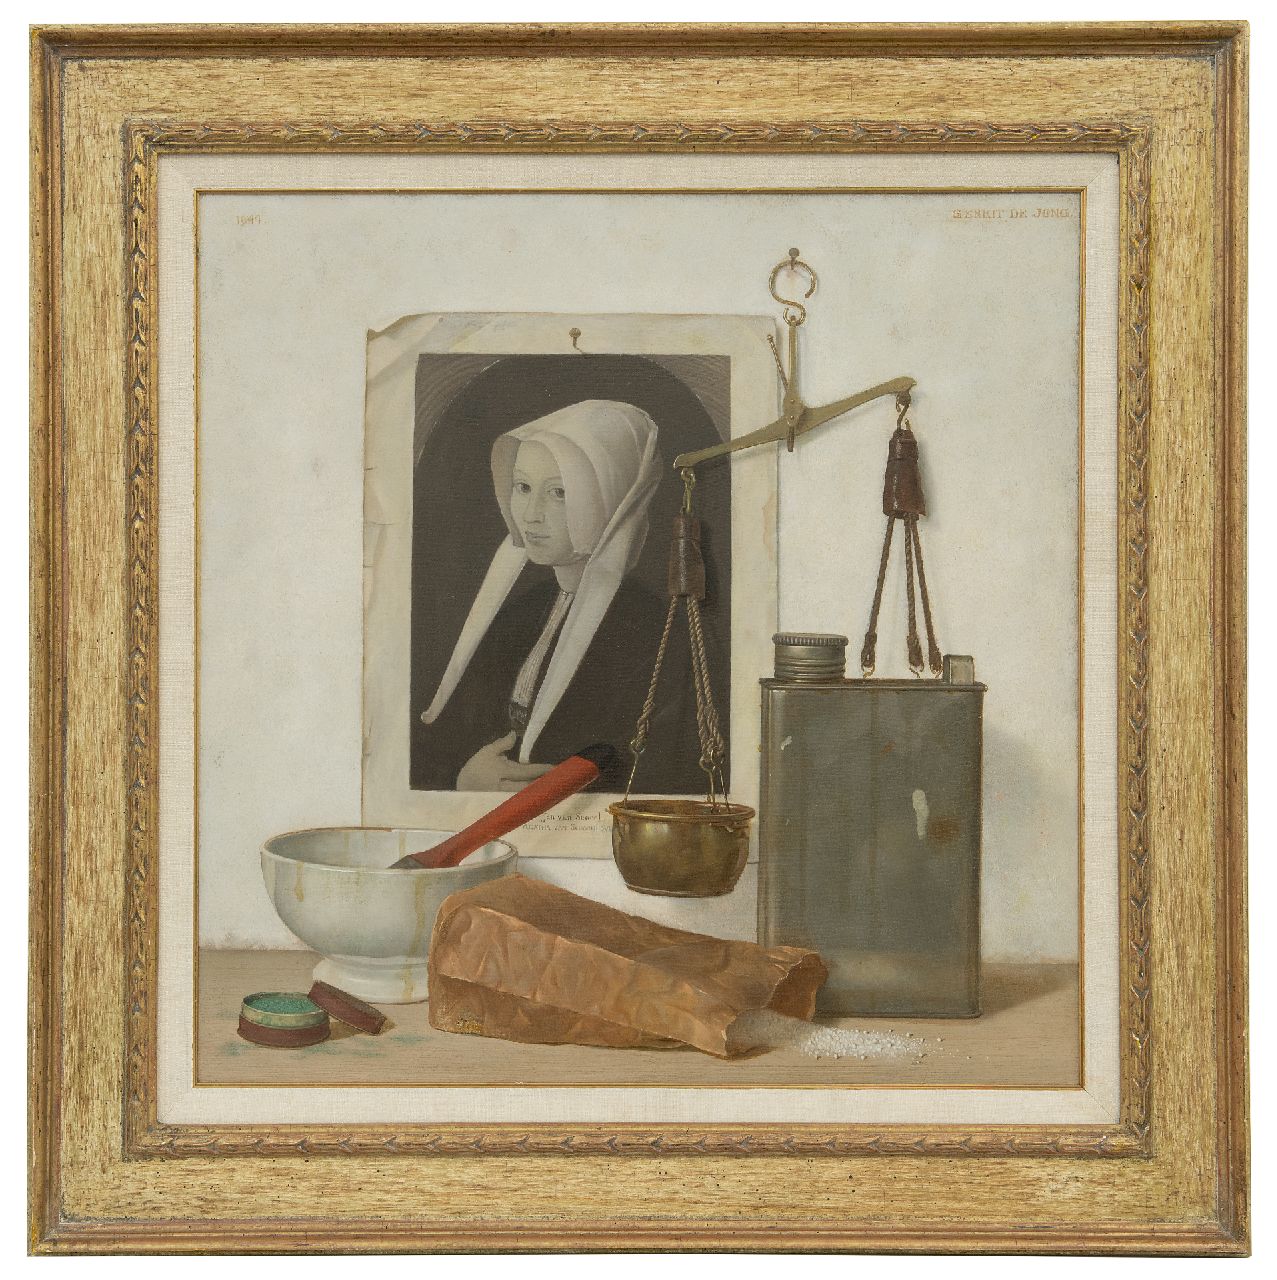 Jong G. de | Gerrit de Jong, A still life of a white bowl, a scale and a print of a painting by Jan Scorel, oil on canvas 50.3 x 50.3 cm, signed u.r. and dated 1944